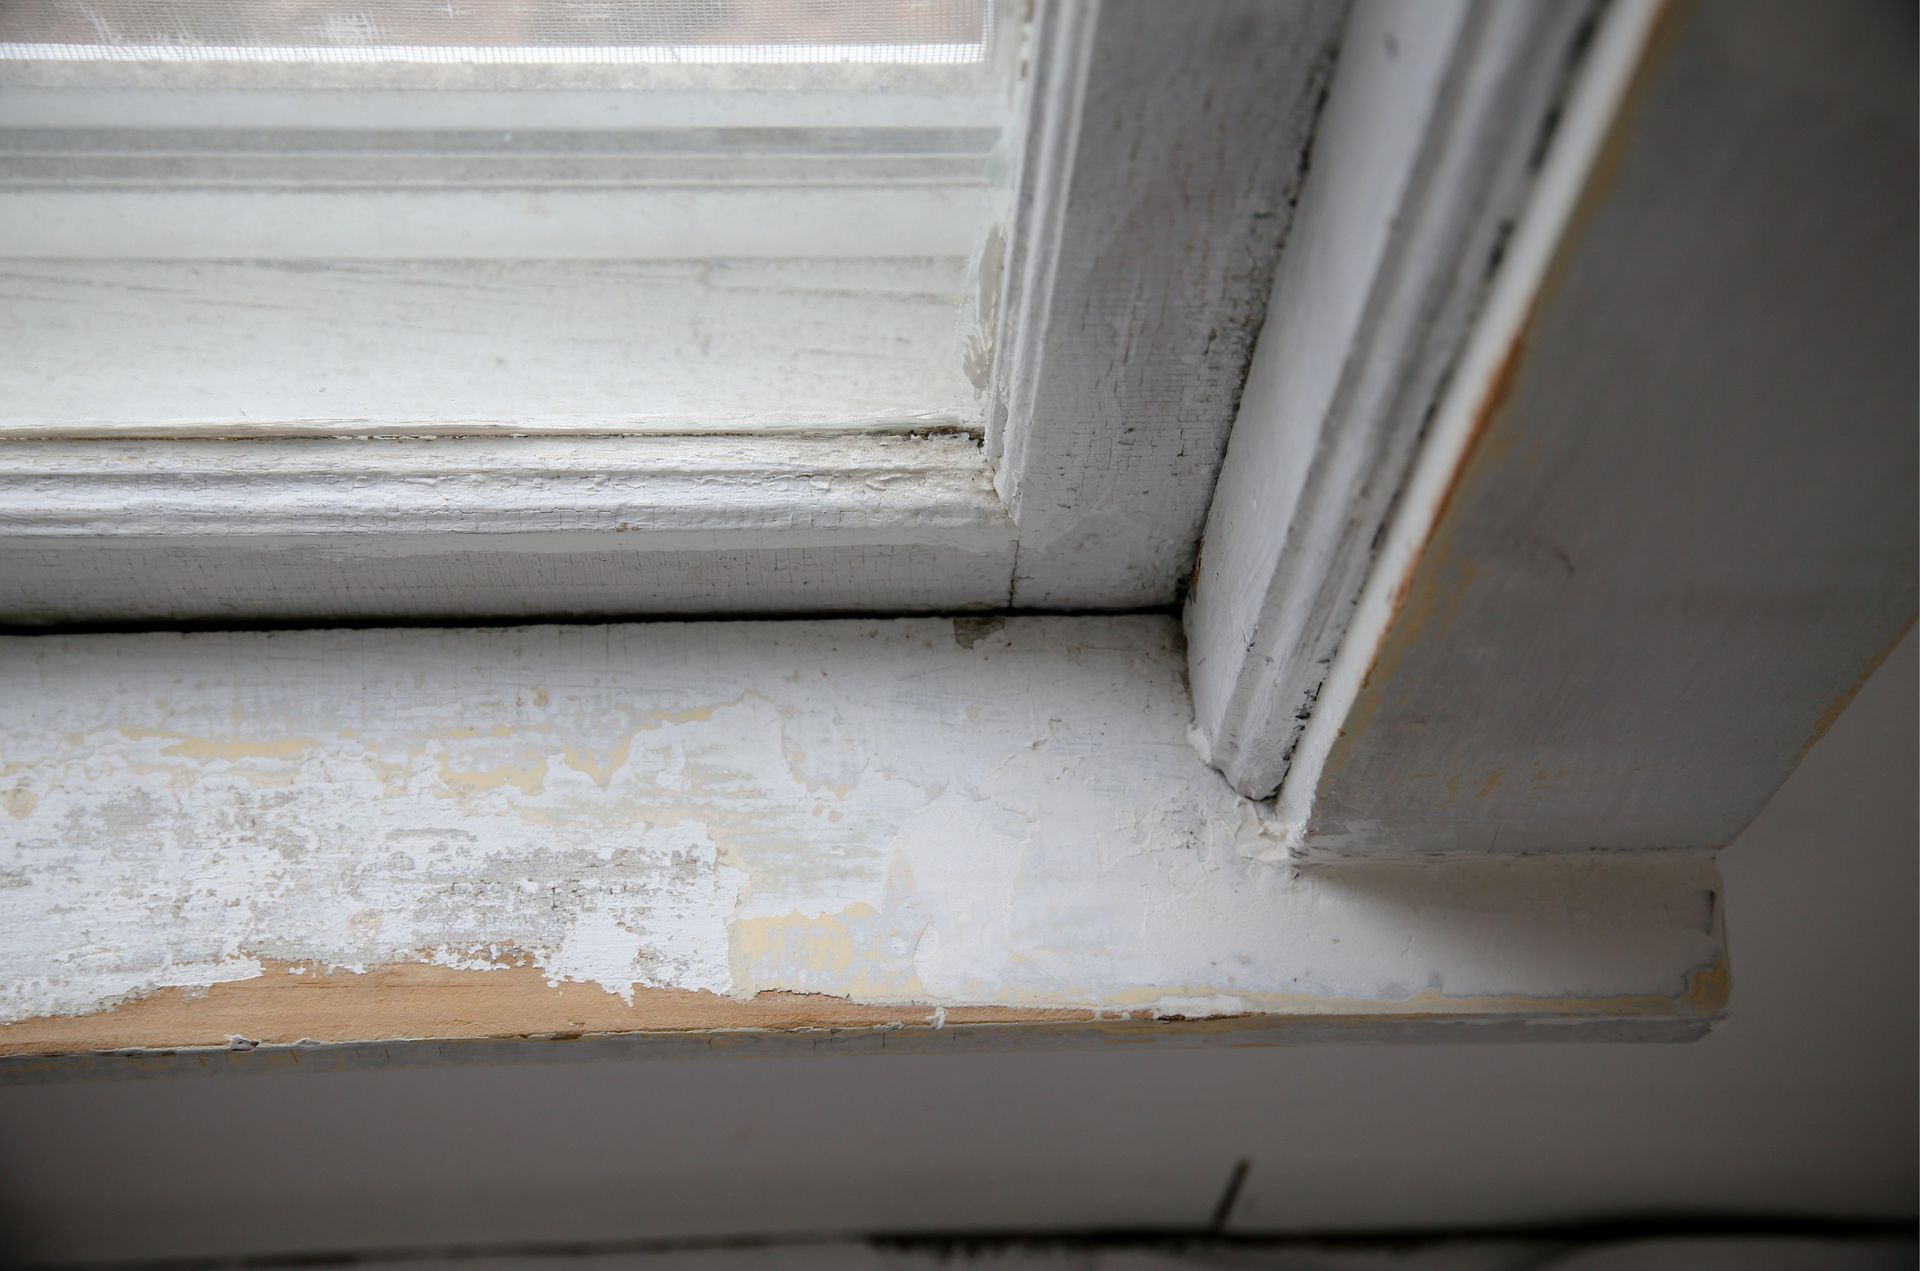 A close up of a window sill with peeling paint.